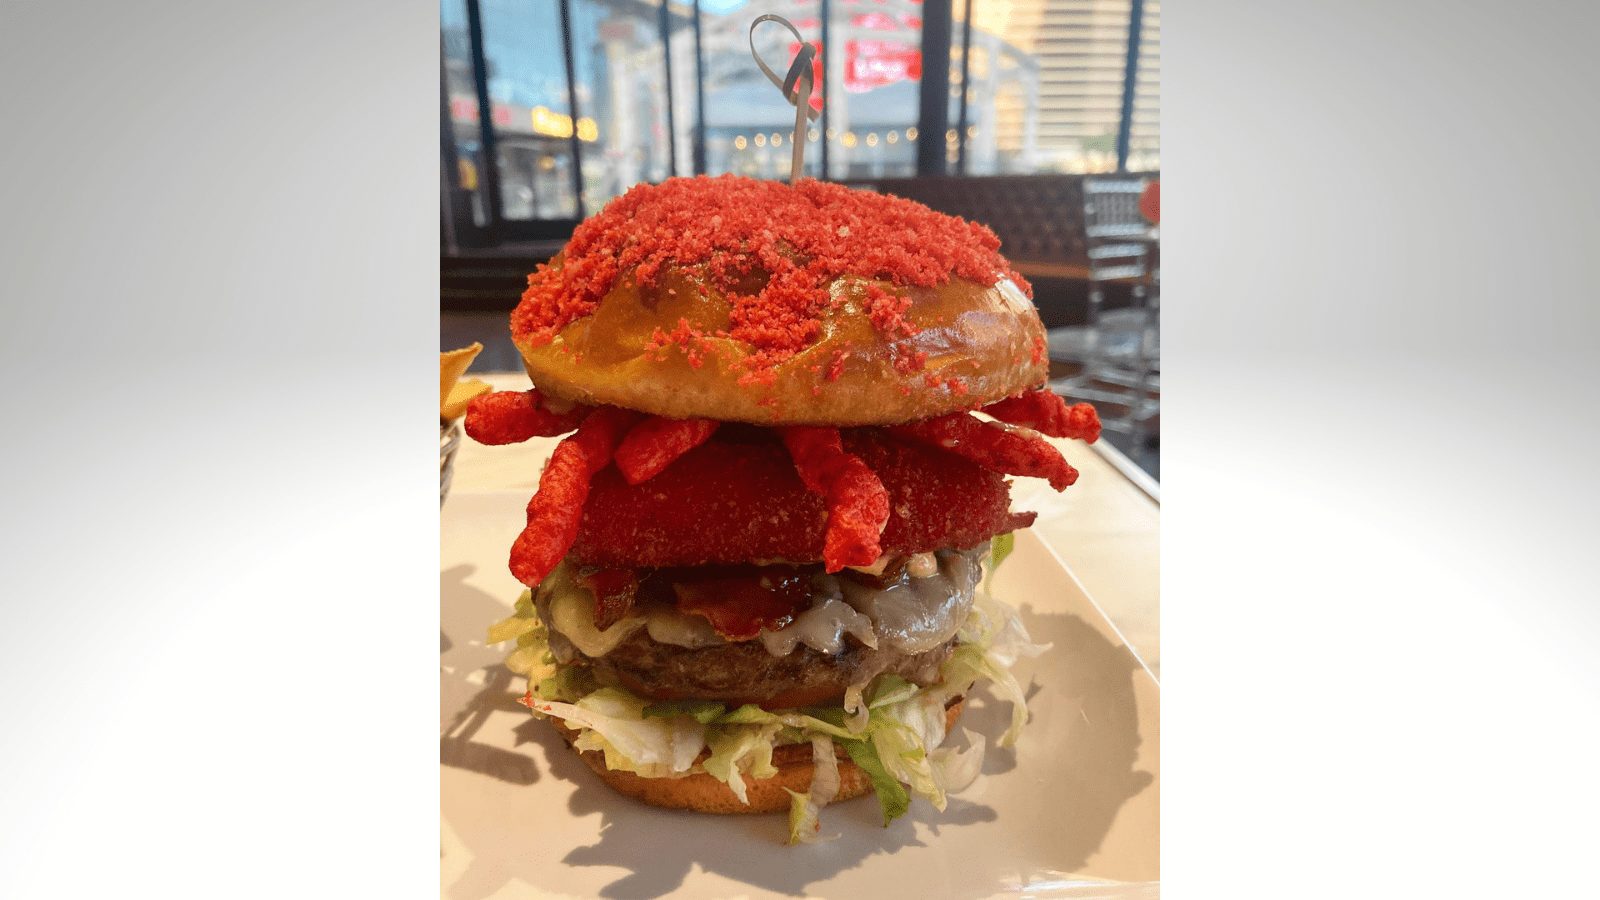 Flaming HOT Cheetos Burger from Sugar Factory American Brasserie. | Image by Sugar Factory American Brasserie